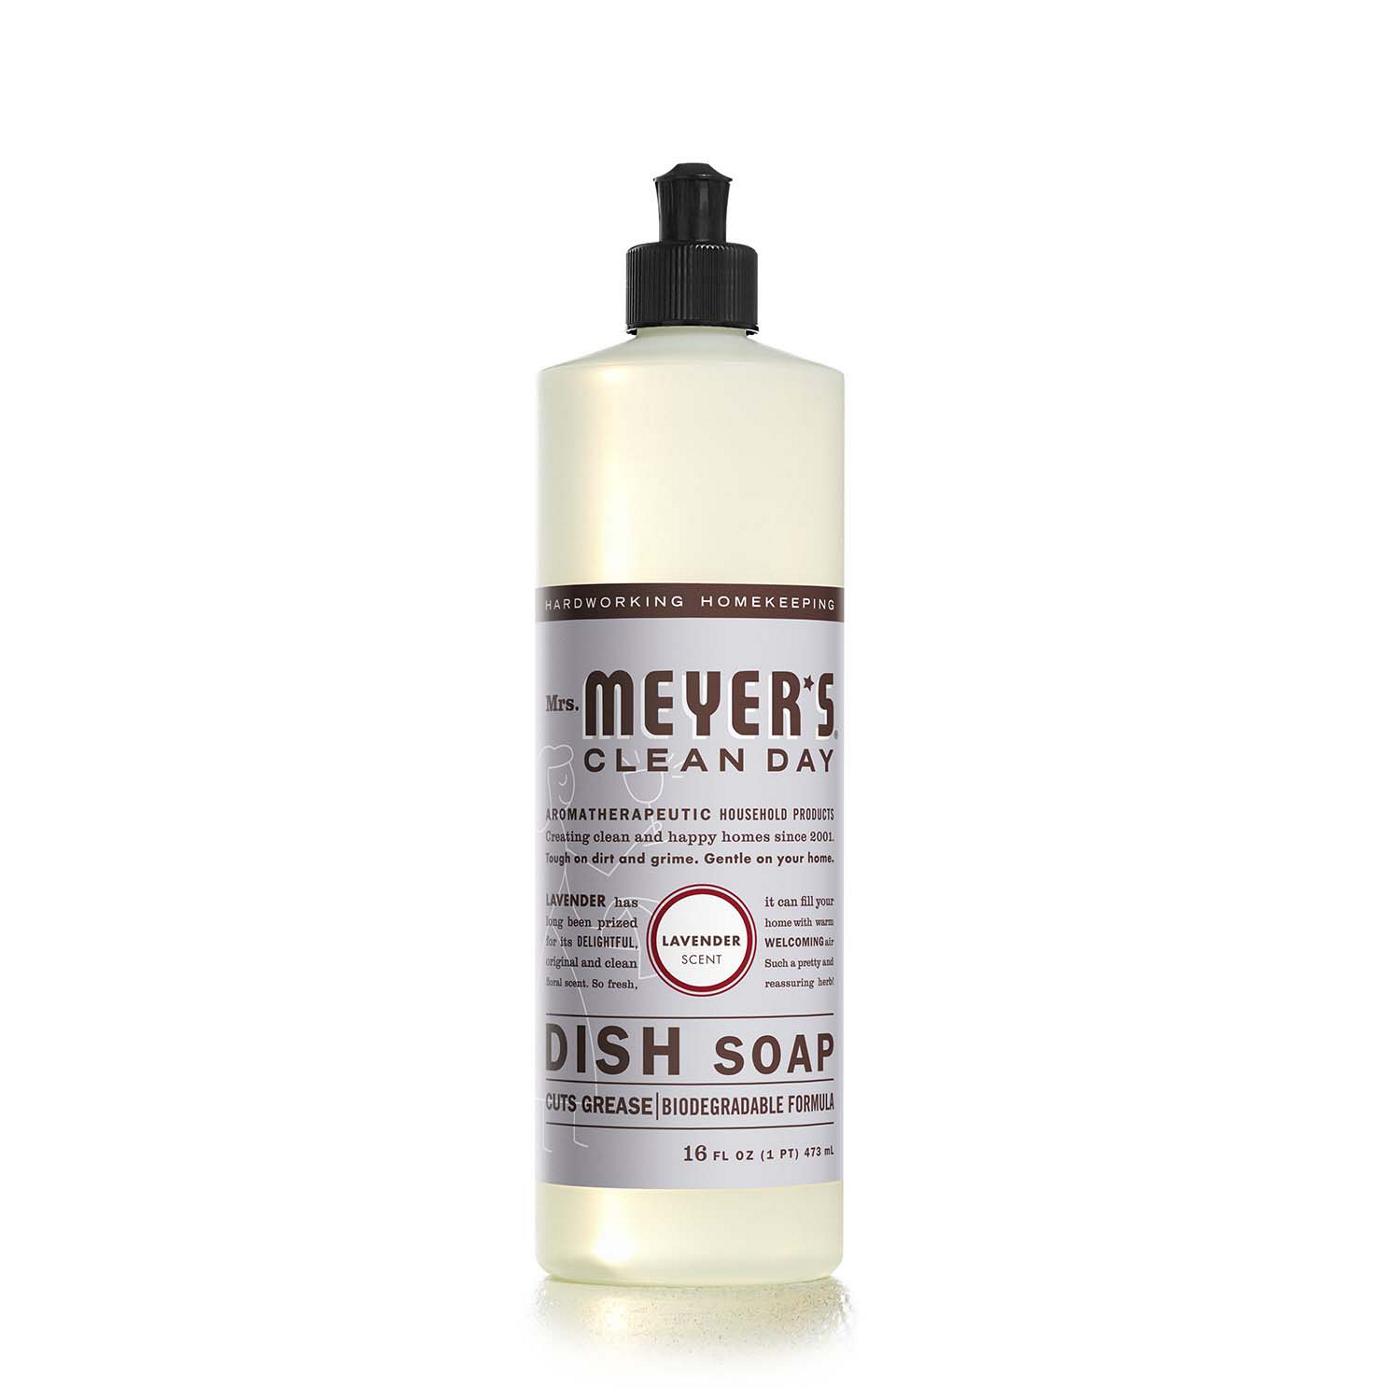 Mrs. Meyer's Clean Day Lavender Scent Dish Soap; image 1 of 6